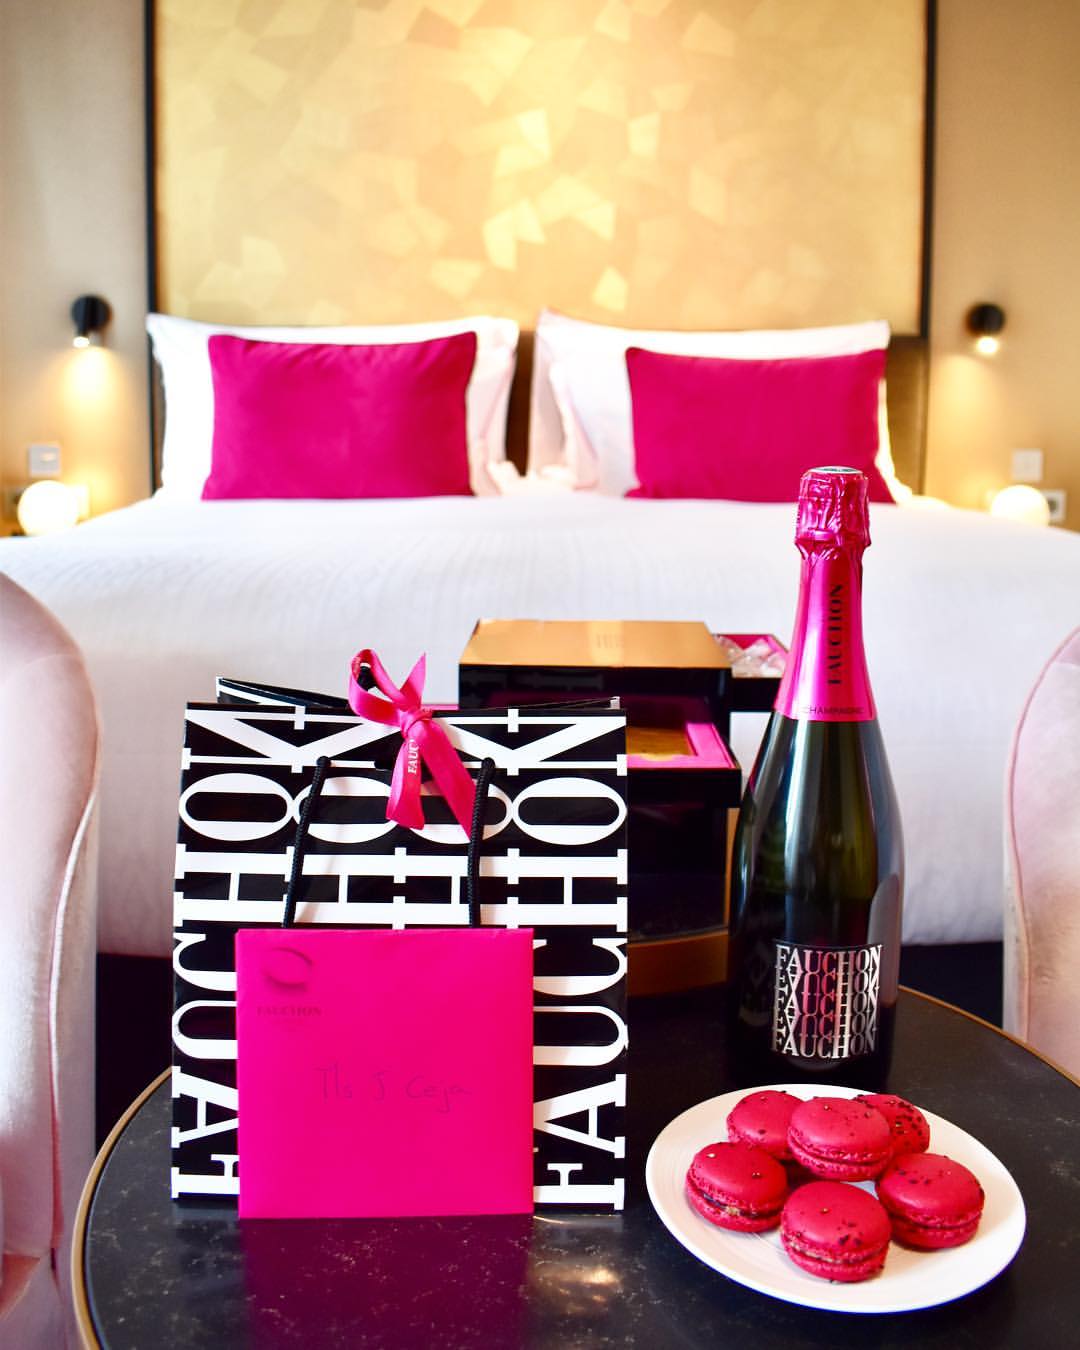 What a welcome! Love my room at the @fauchon_lhotel_paris...